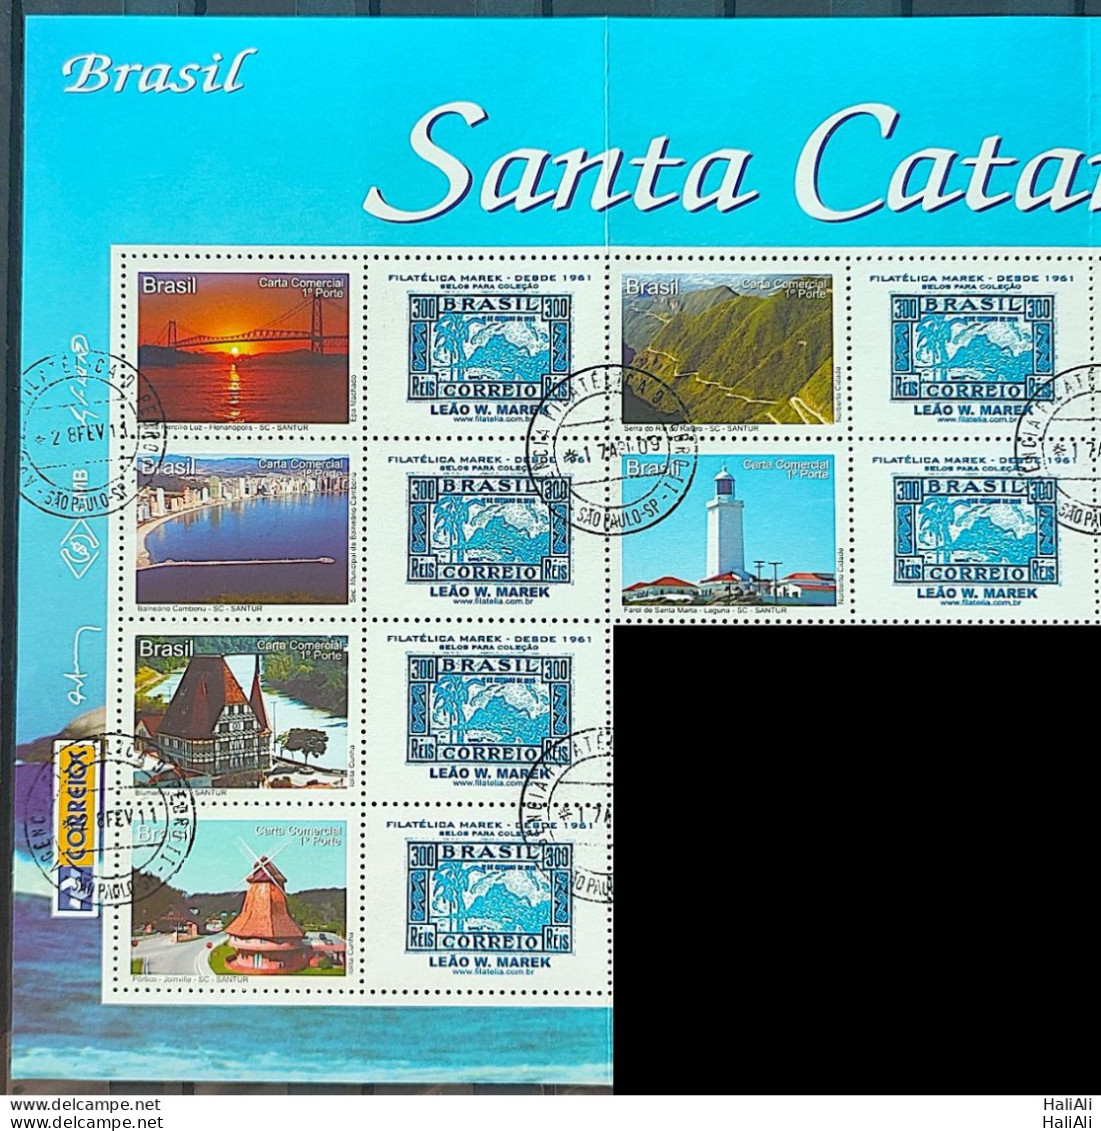 C 2783 Brazil Personalized Stamp Santa Catarina 2009 CPD SP Left Side Od The Sheet Very Rare - Personalisiert